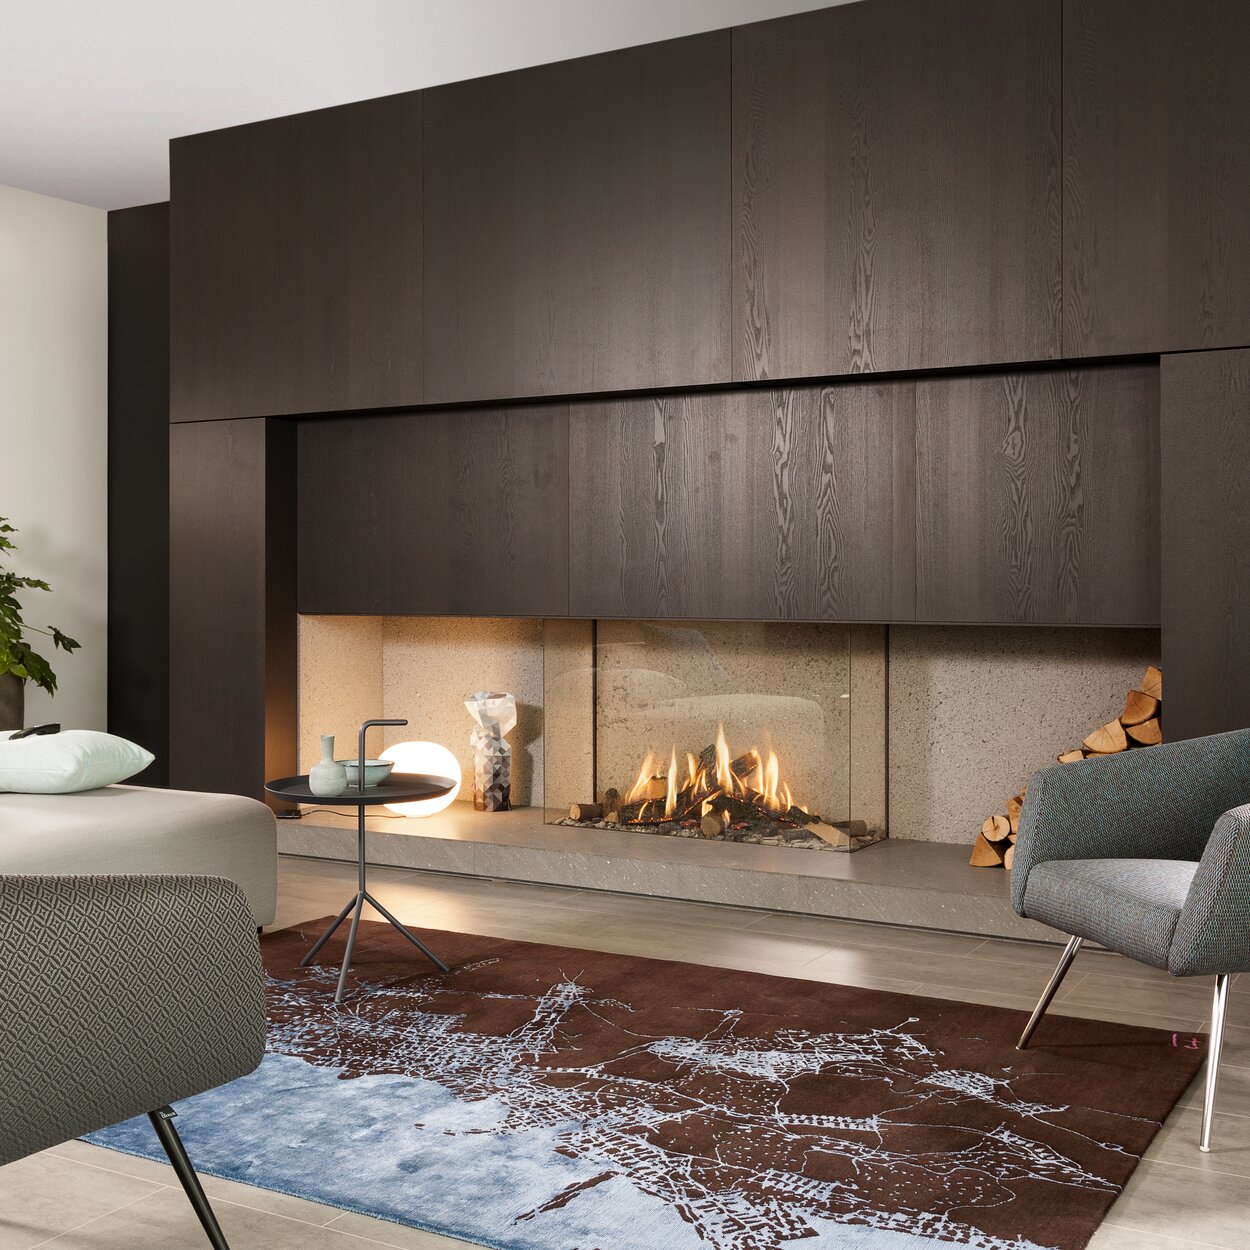 Gas fireplace GP115/75S glazed on 3-sided on modern dark wooden wall installed in living room with sofa and armchair